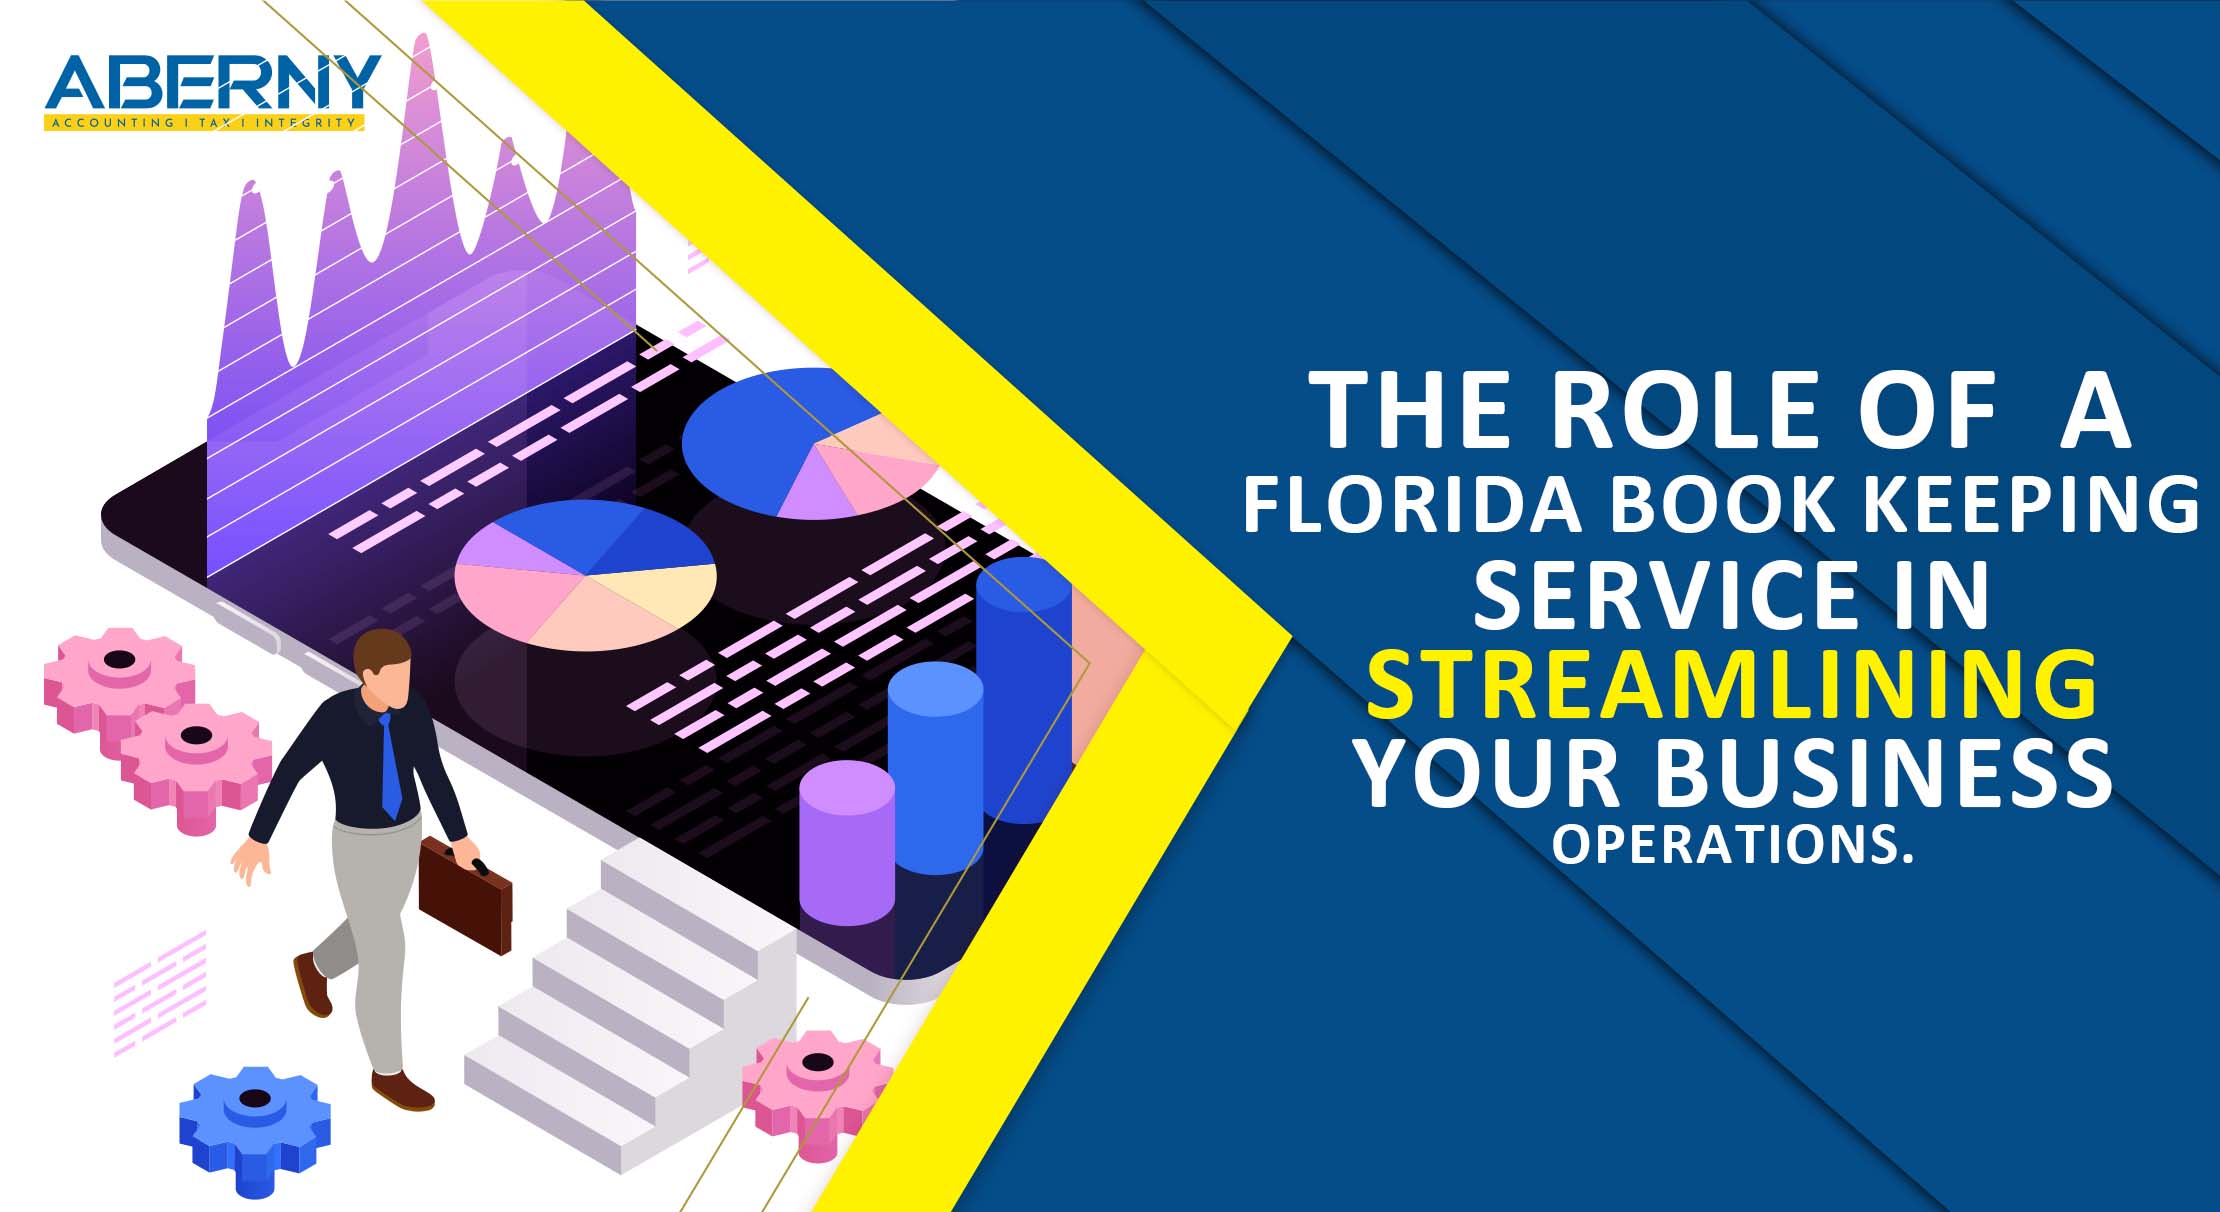 The-Role-of-a-Florida-Bookkeeping-Service-in-Streamlining-Your-Business-Operations